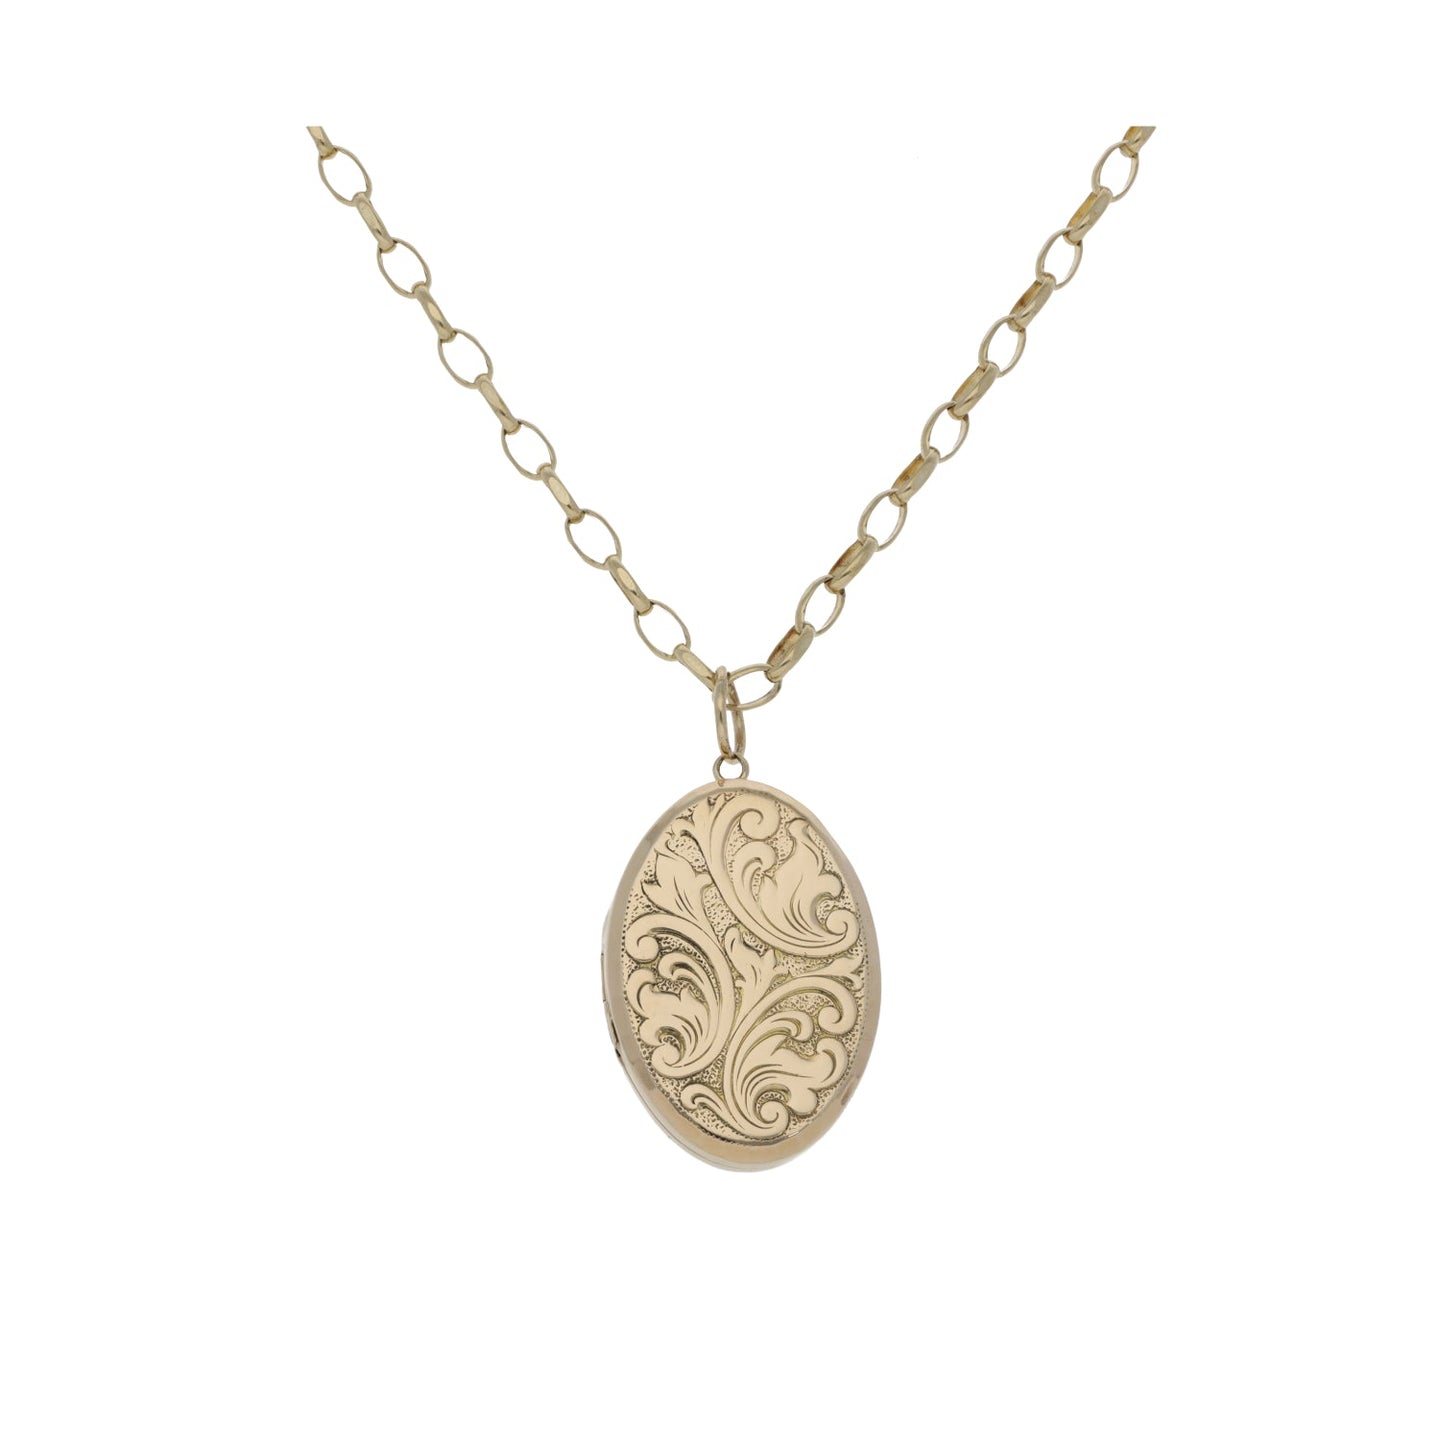 9ct Gold Ladies Patterned Locket Pendant With Chain